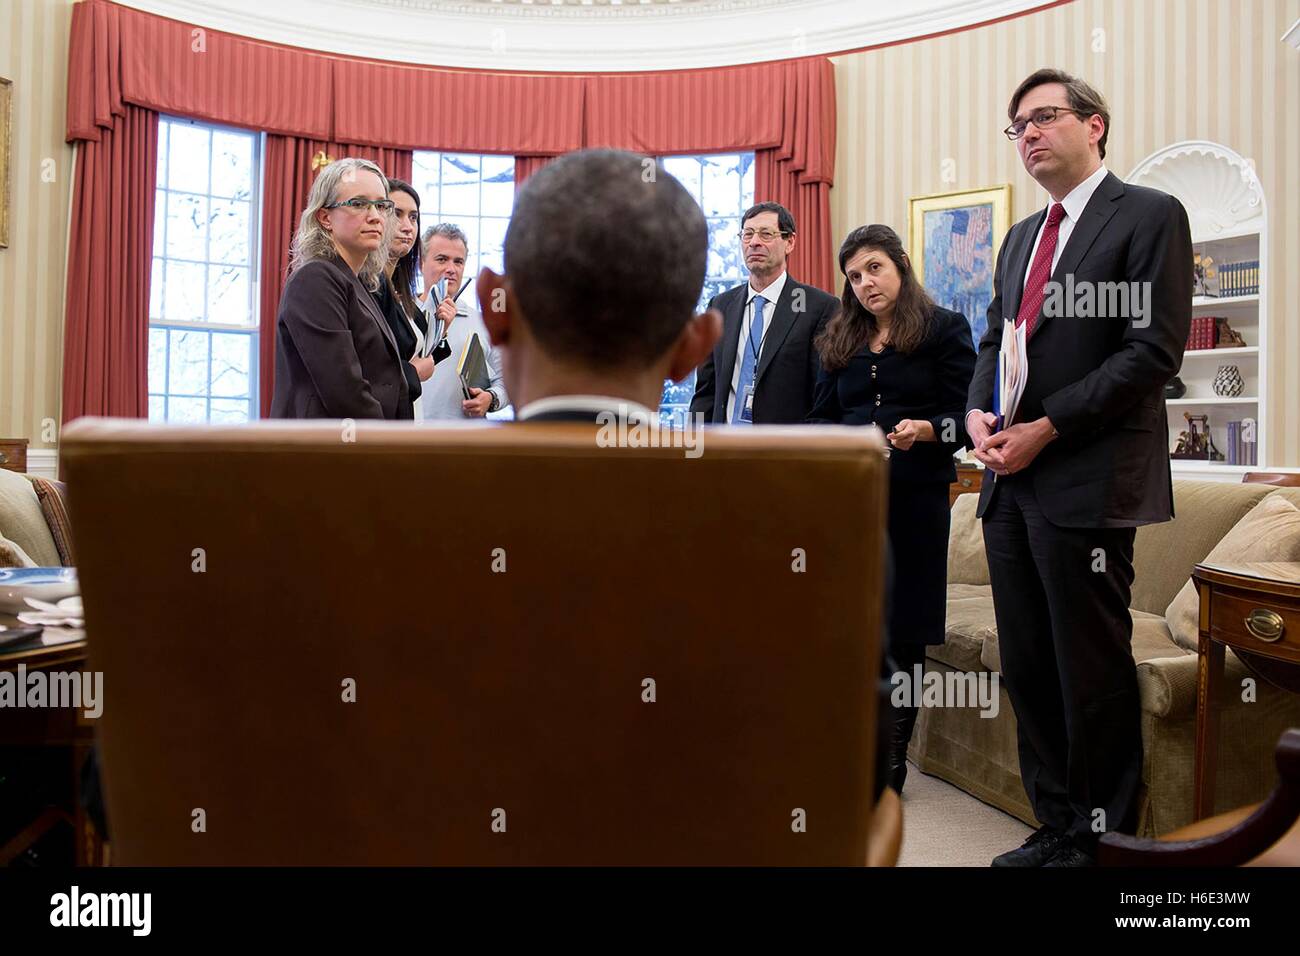 U.S. President Barack Obama talks to Council of Economic Advisers staff after a meeting in the White House Oval Office March 5, 2015 in Washington, DC. Stock Photo